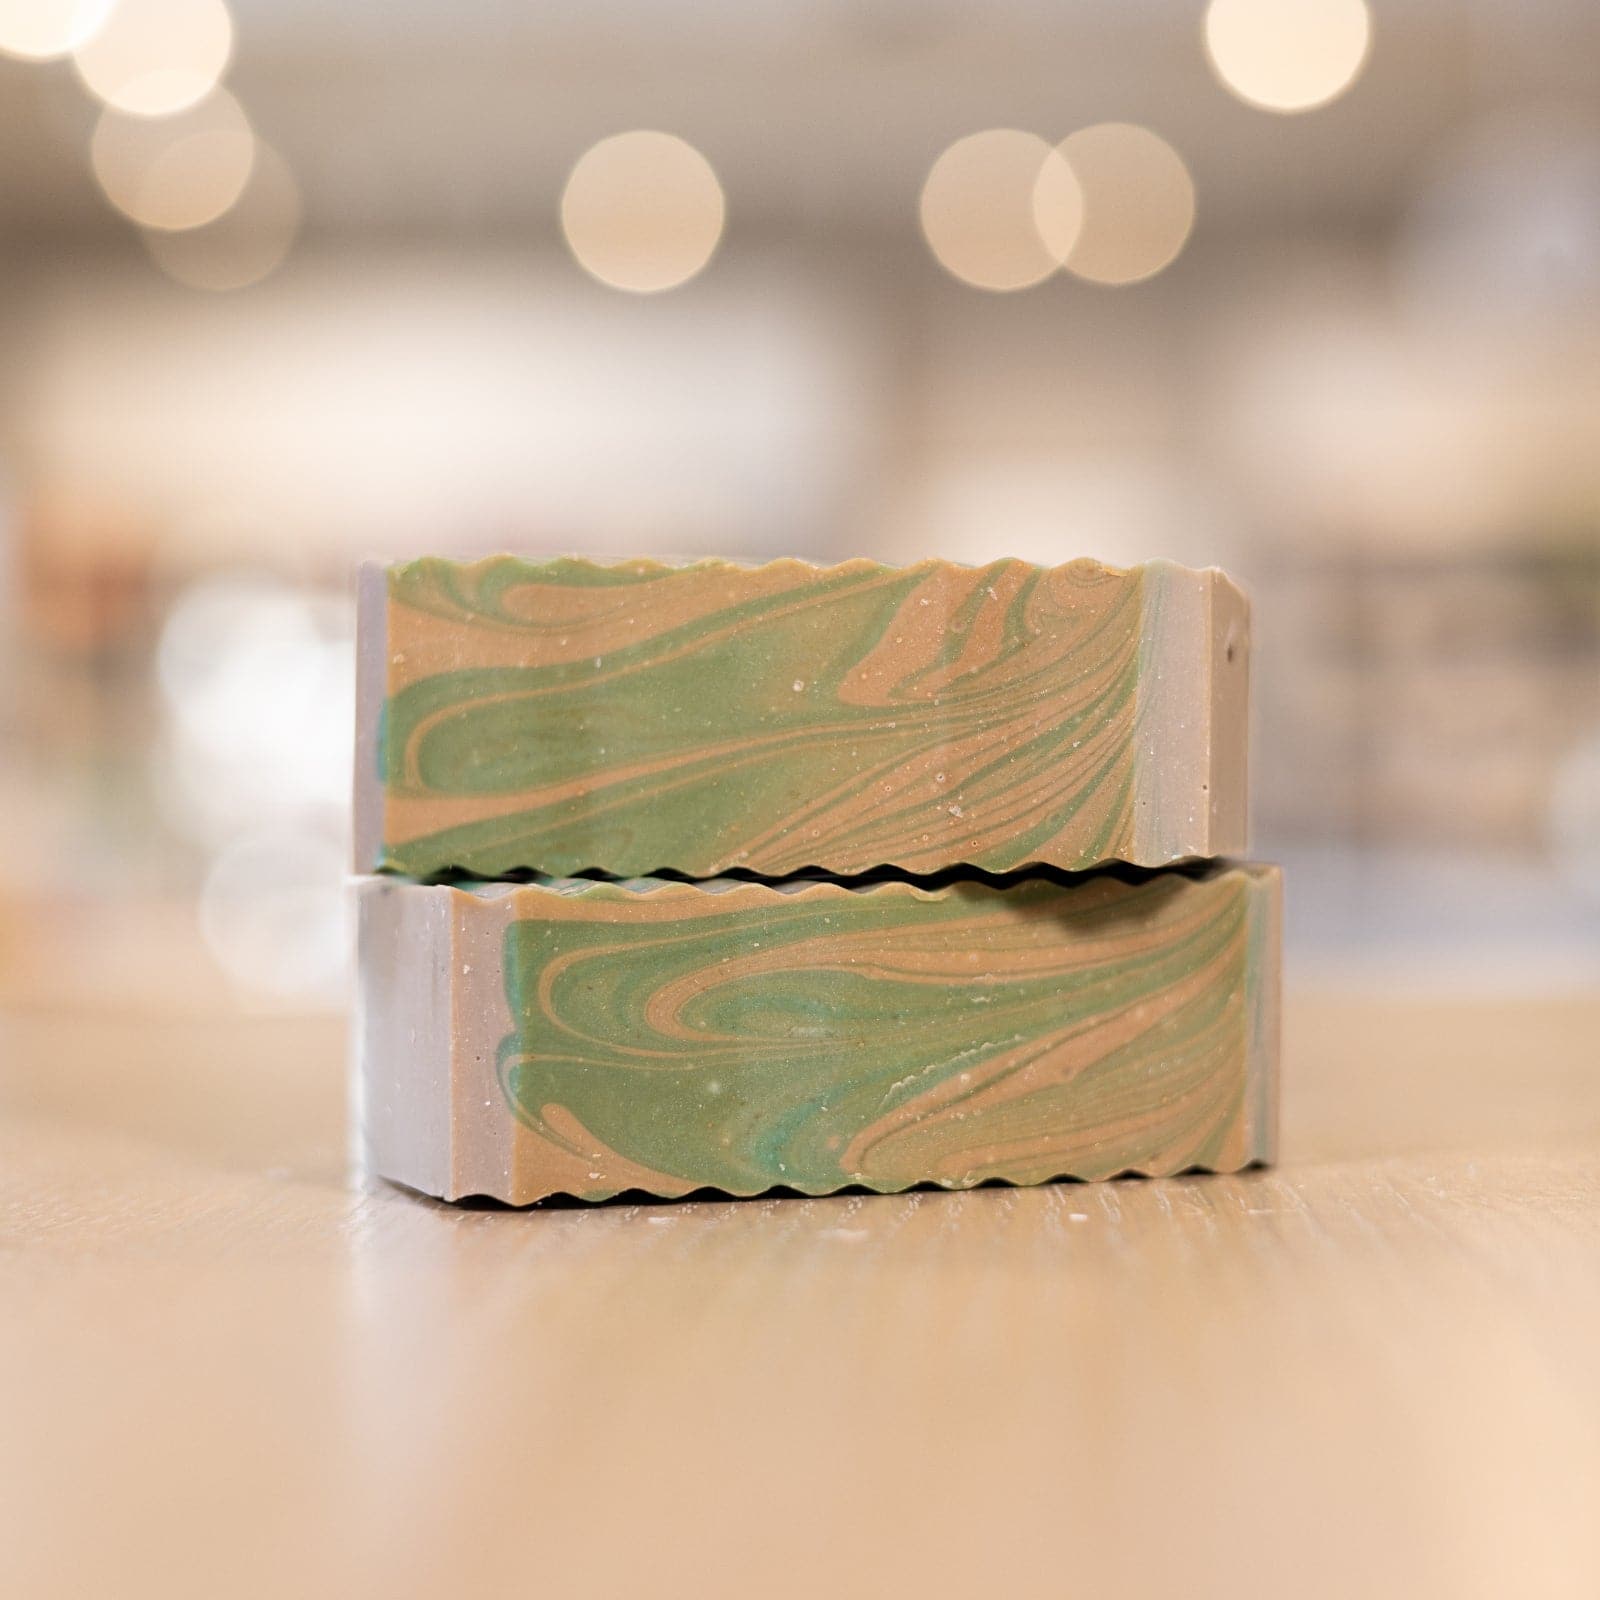 Two Commando Soap Bars with green and brown colors stacked on counter